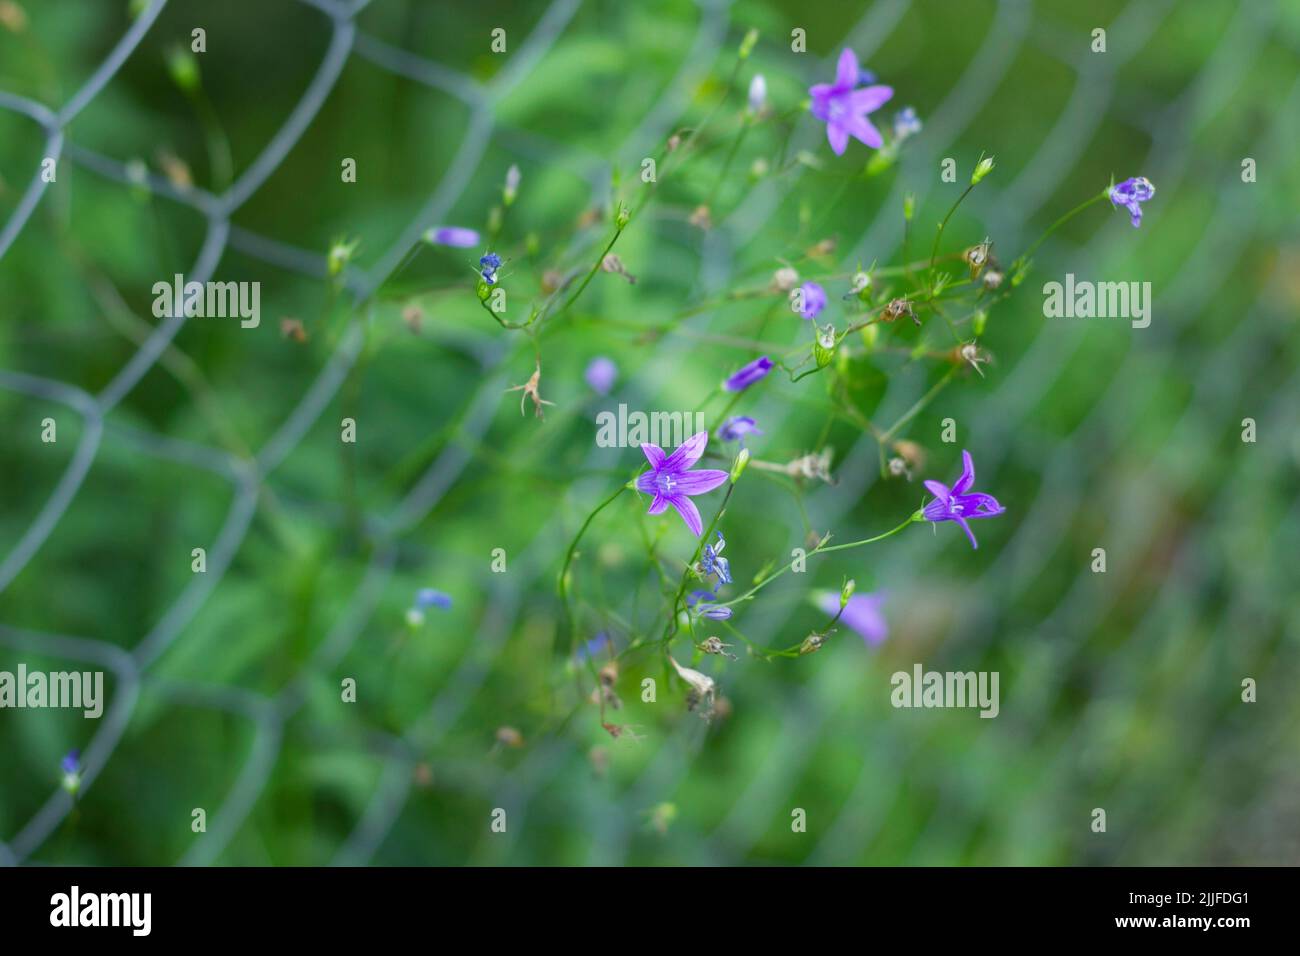 Lilac wild flowers bluebells with a bud, against the background of an iron grid in green grass Stock Photo